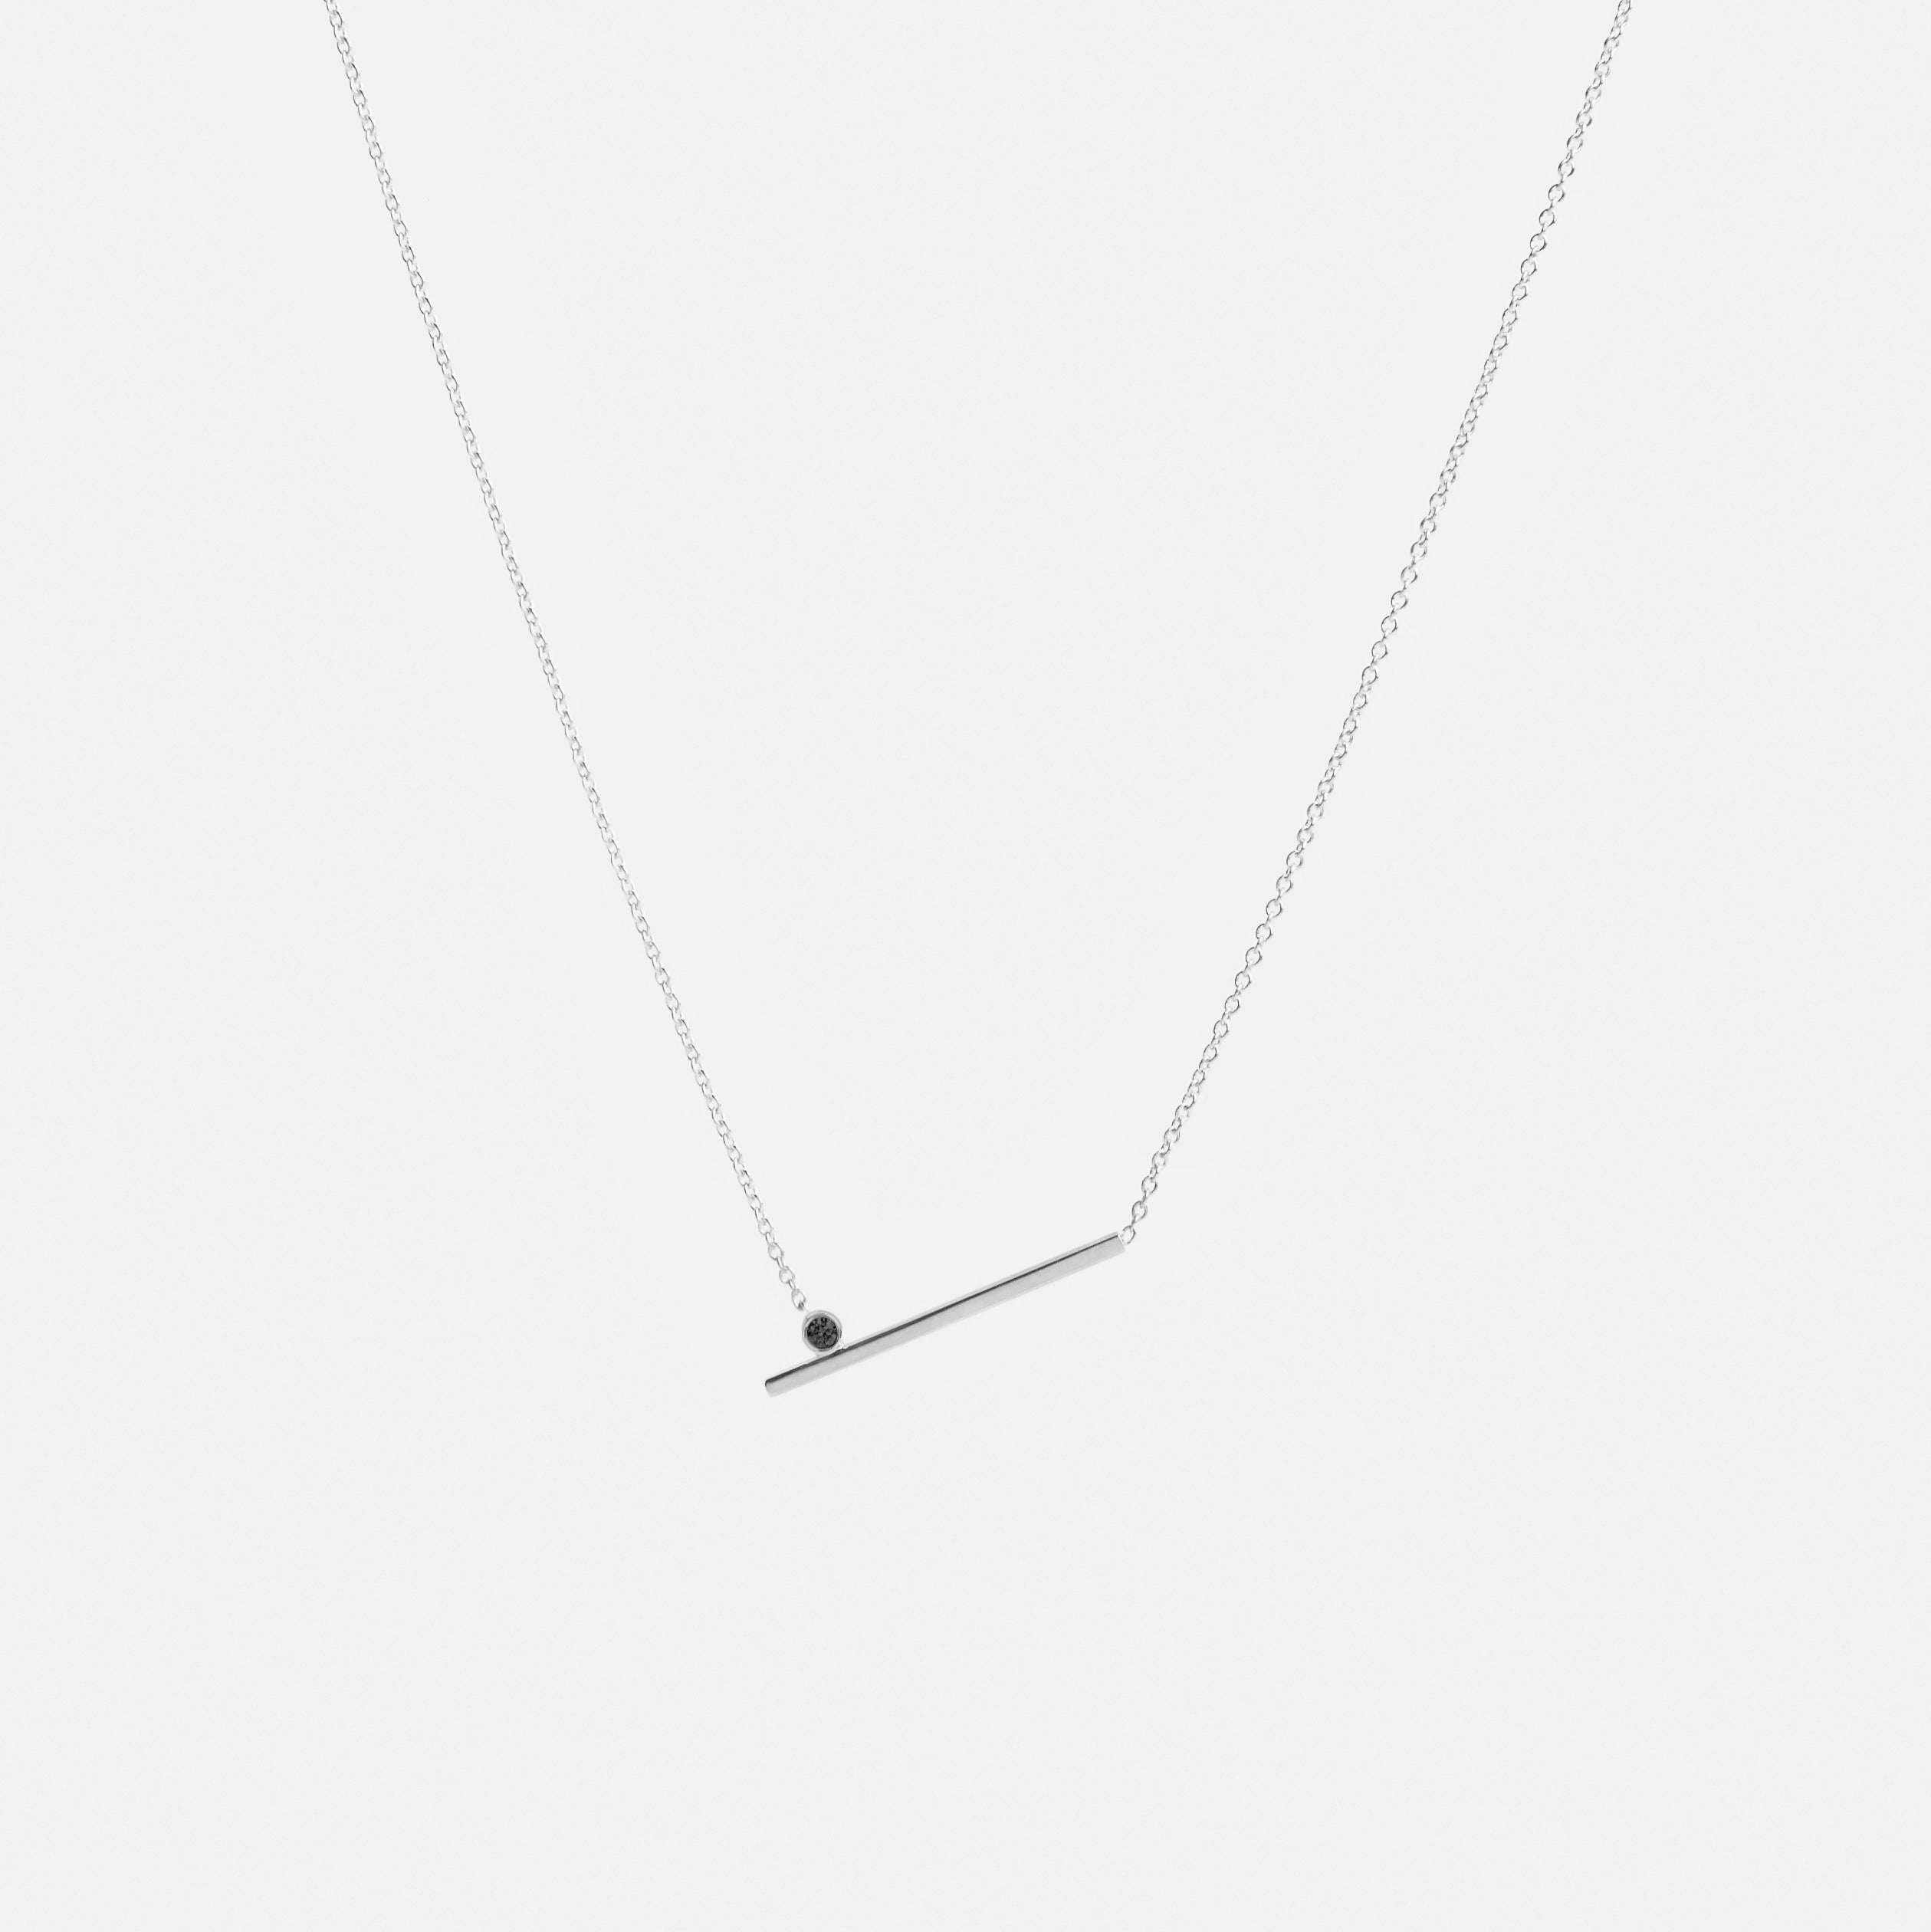 Livi Unconventional Necklace in 14k White Gold Set with Black Diamond By SHW Fine Jewelry NYC